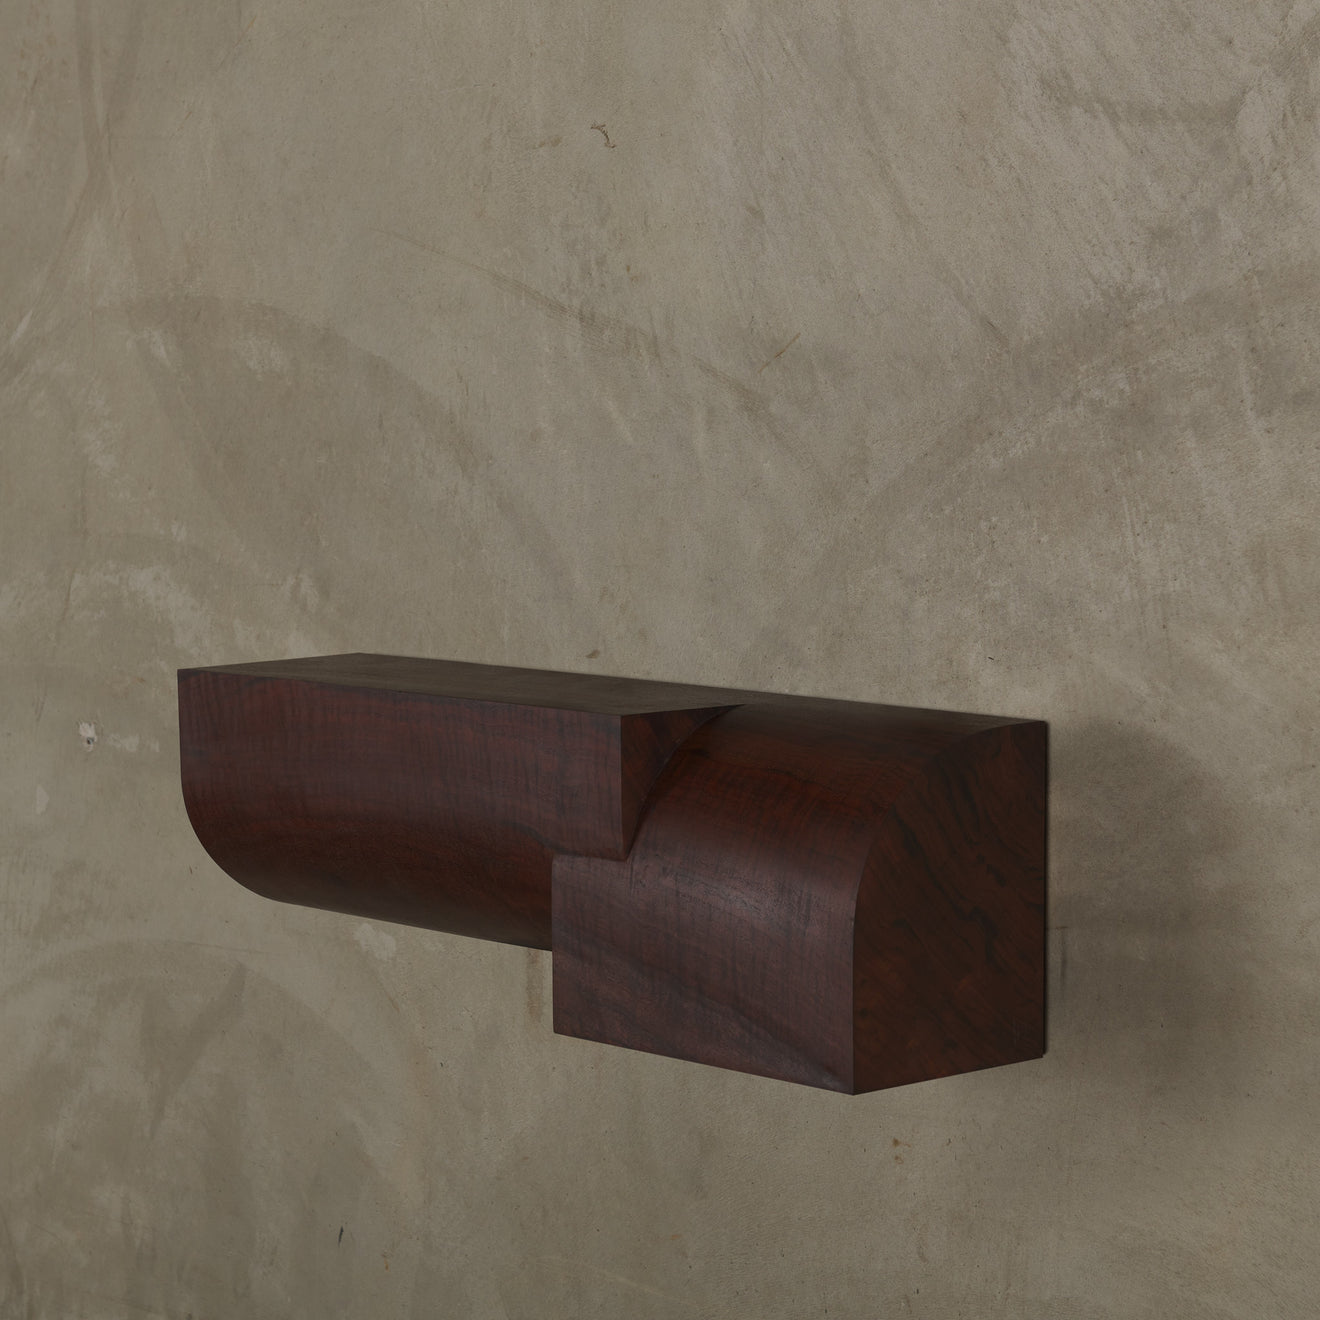 WALL MOUNTED CONSOLE BY CHRISTOPHER NORMAN